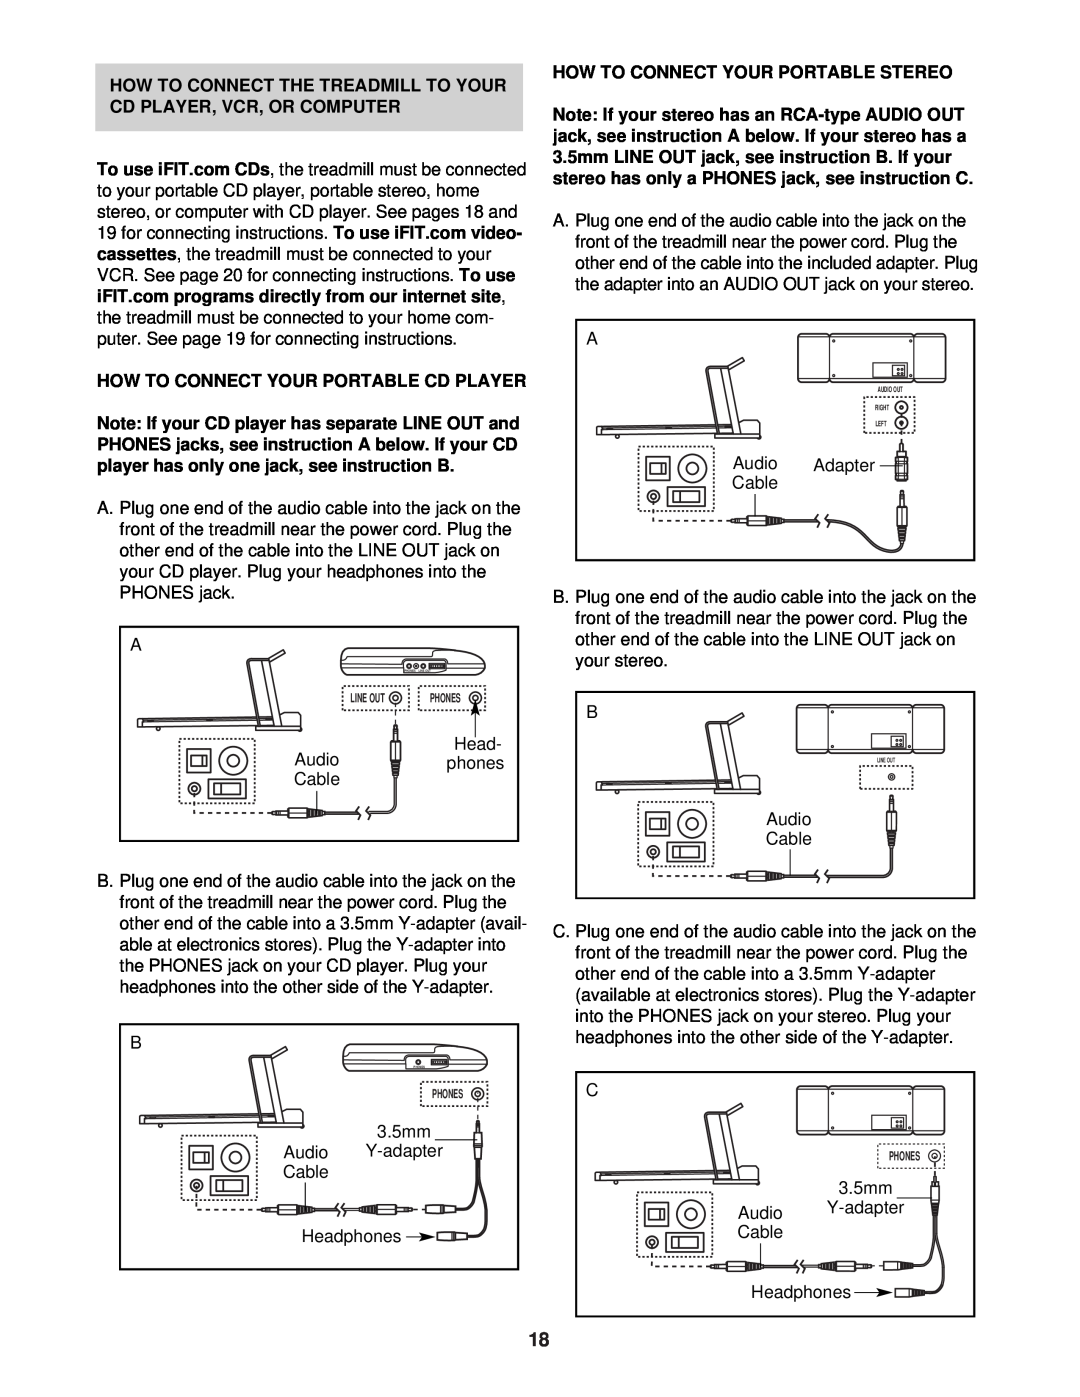 ProForm DTL72940 How To Connect The Treadmill To Your Cd Player, Vcr, Or Computer, How To Connect Your Portable Cd Player 